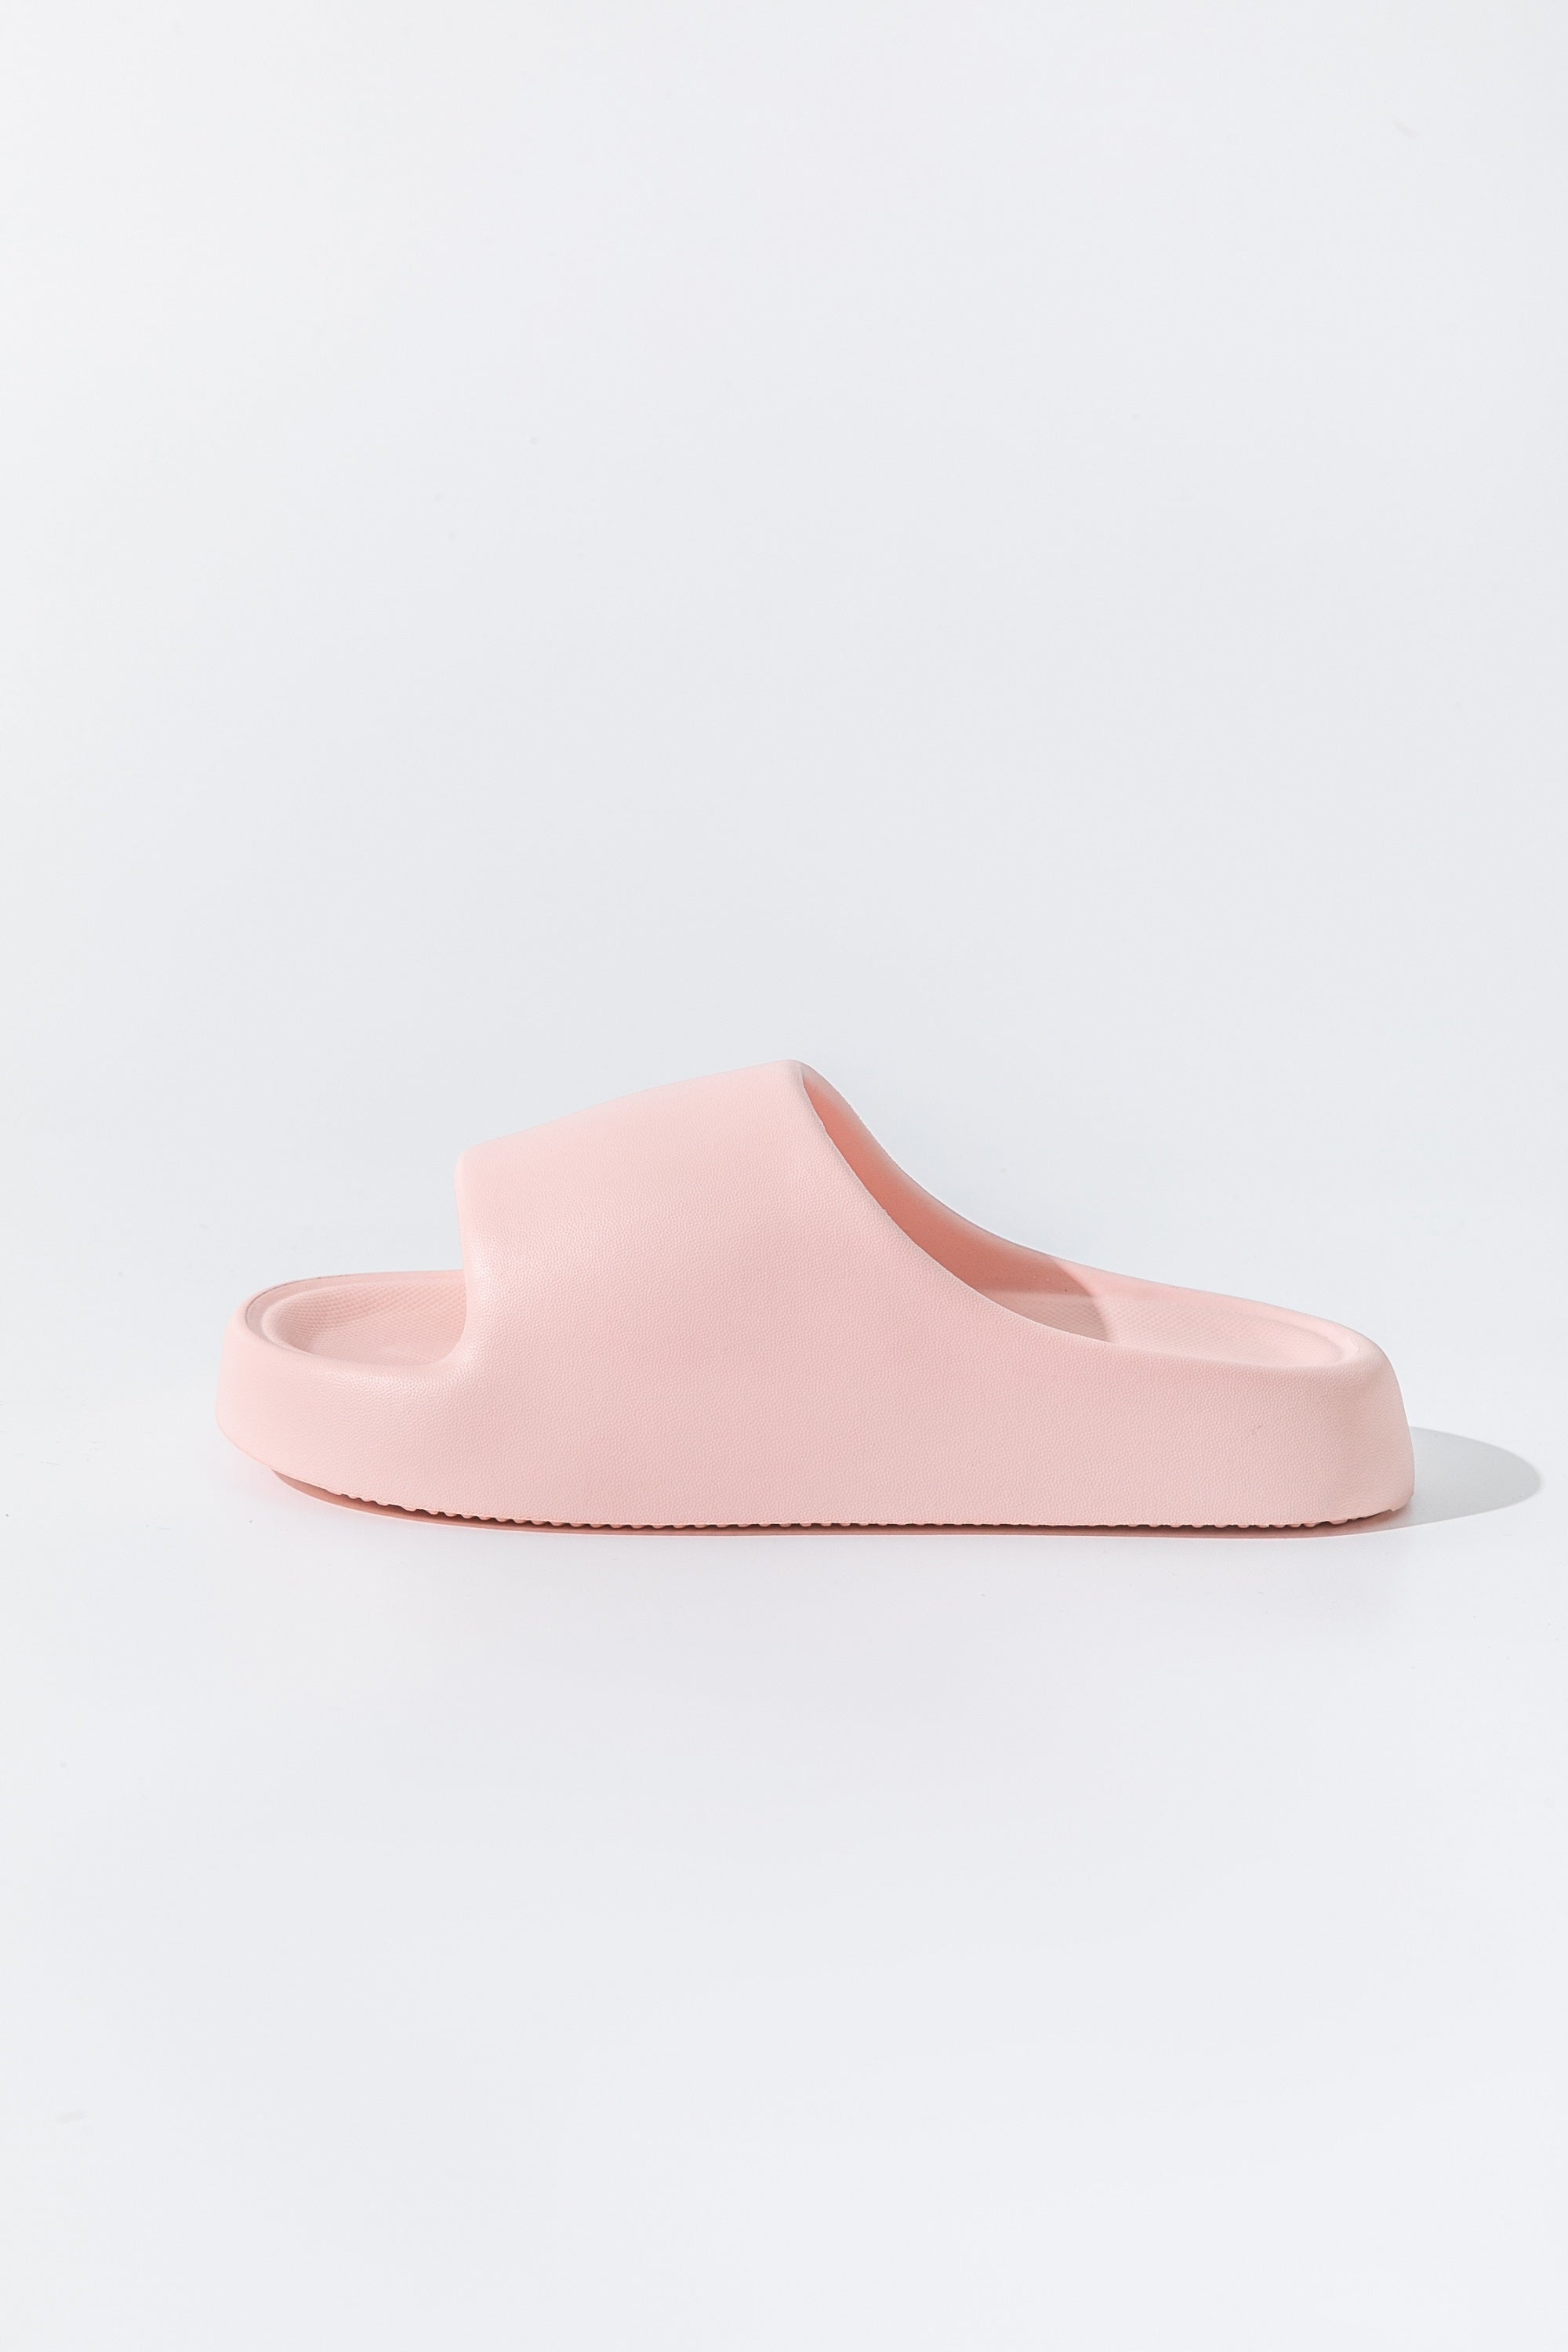 MINISO Q-STRUCT SERIES WOMEN'S FASHION SLIPPERS(PINK,37-38) 2015063812116 FASHIONABLE SLIPPERS